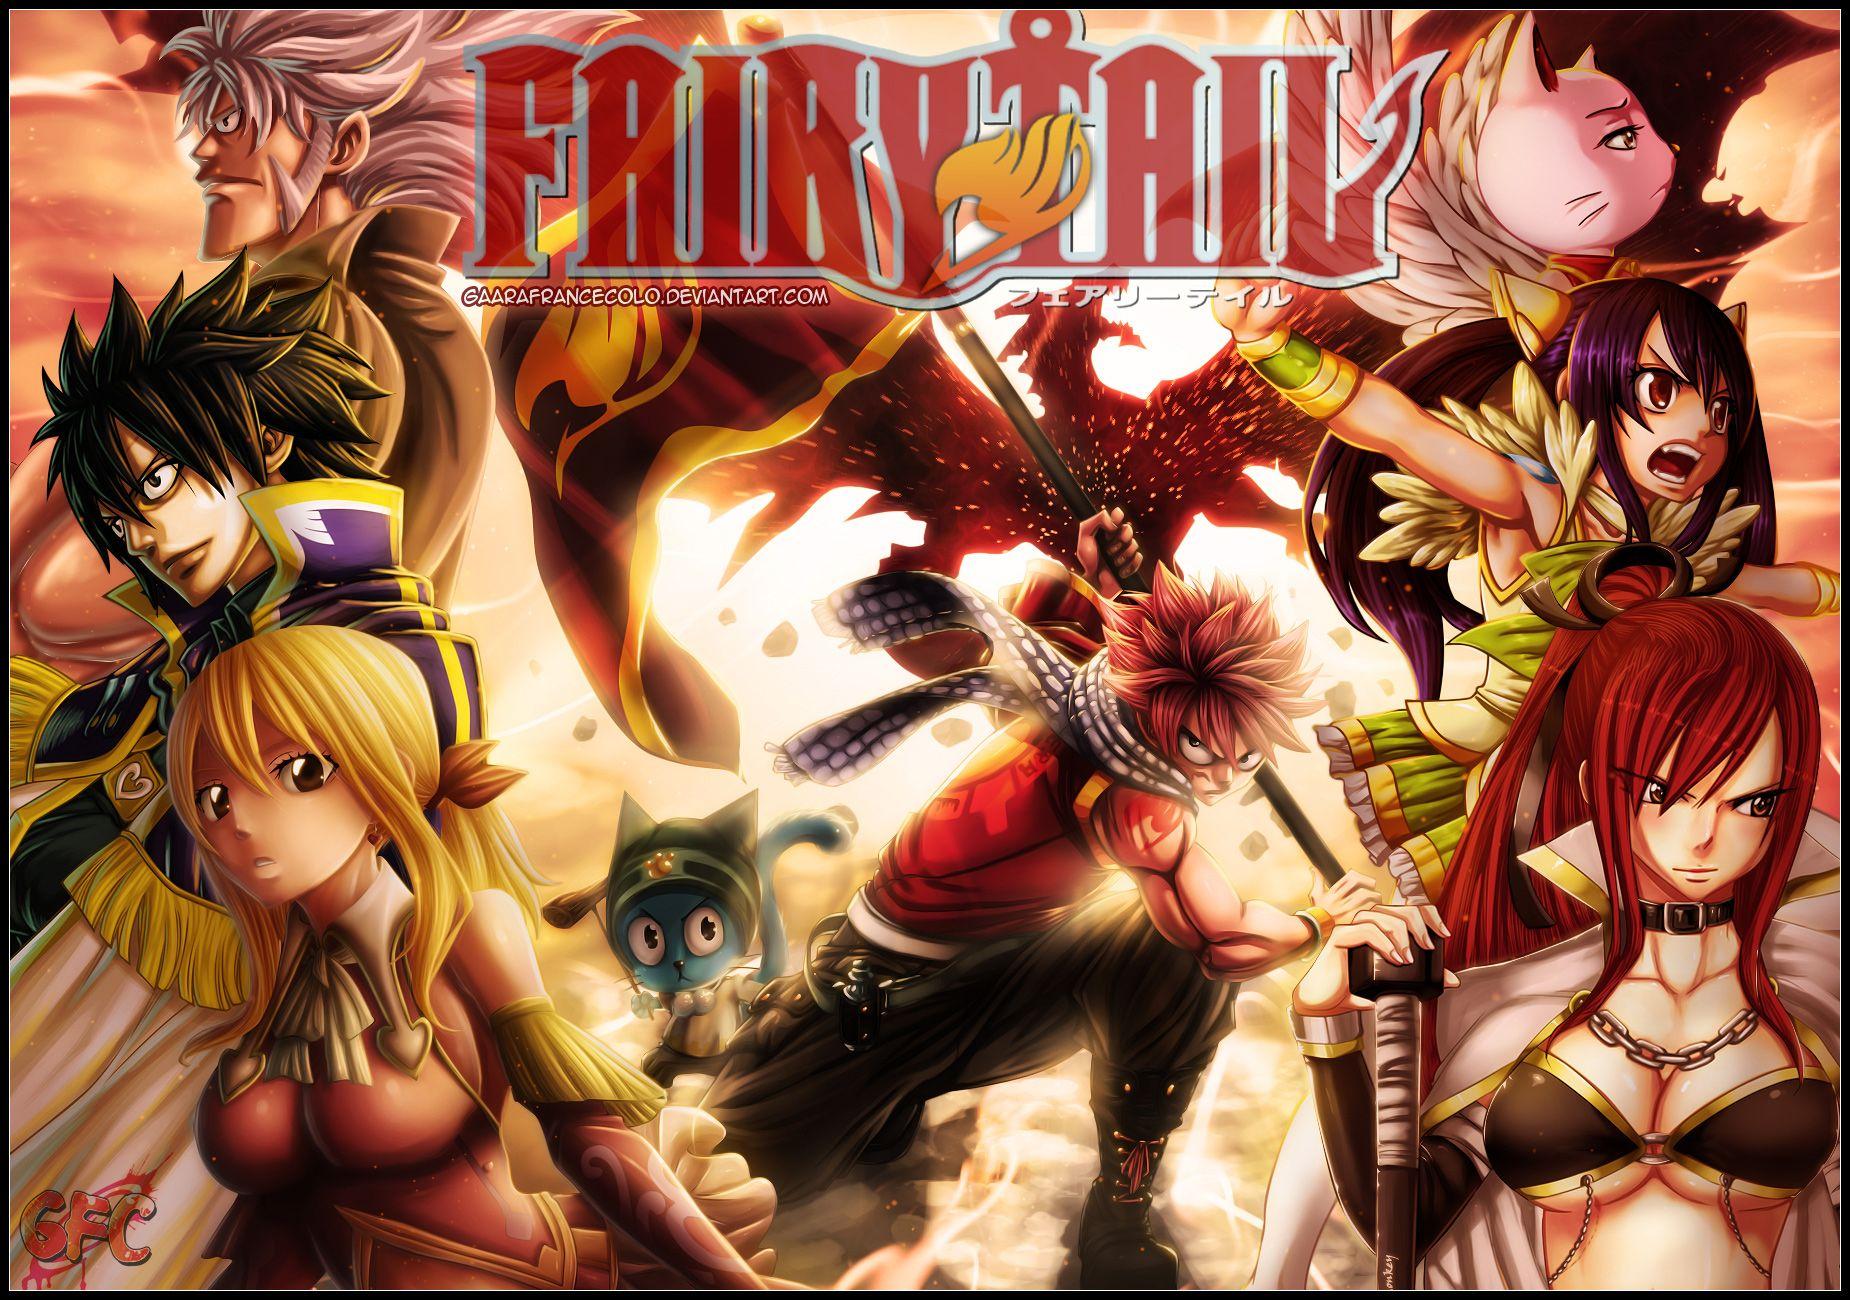 Fairy Tail. Free Anime Wallpaper Site